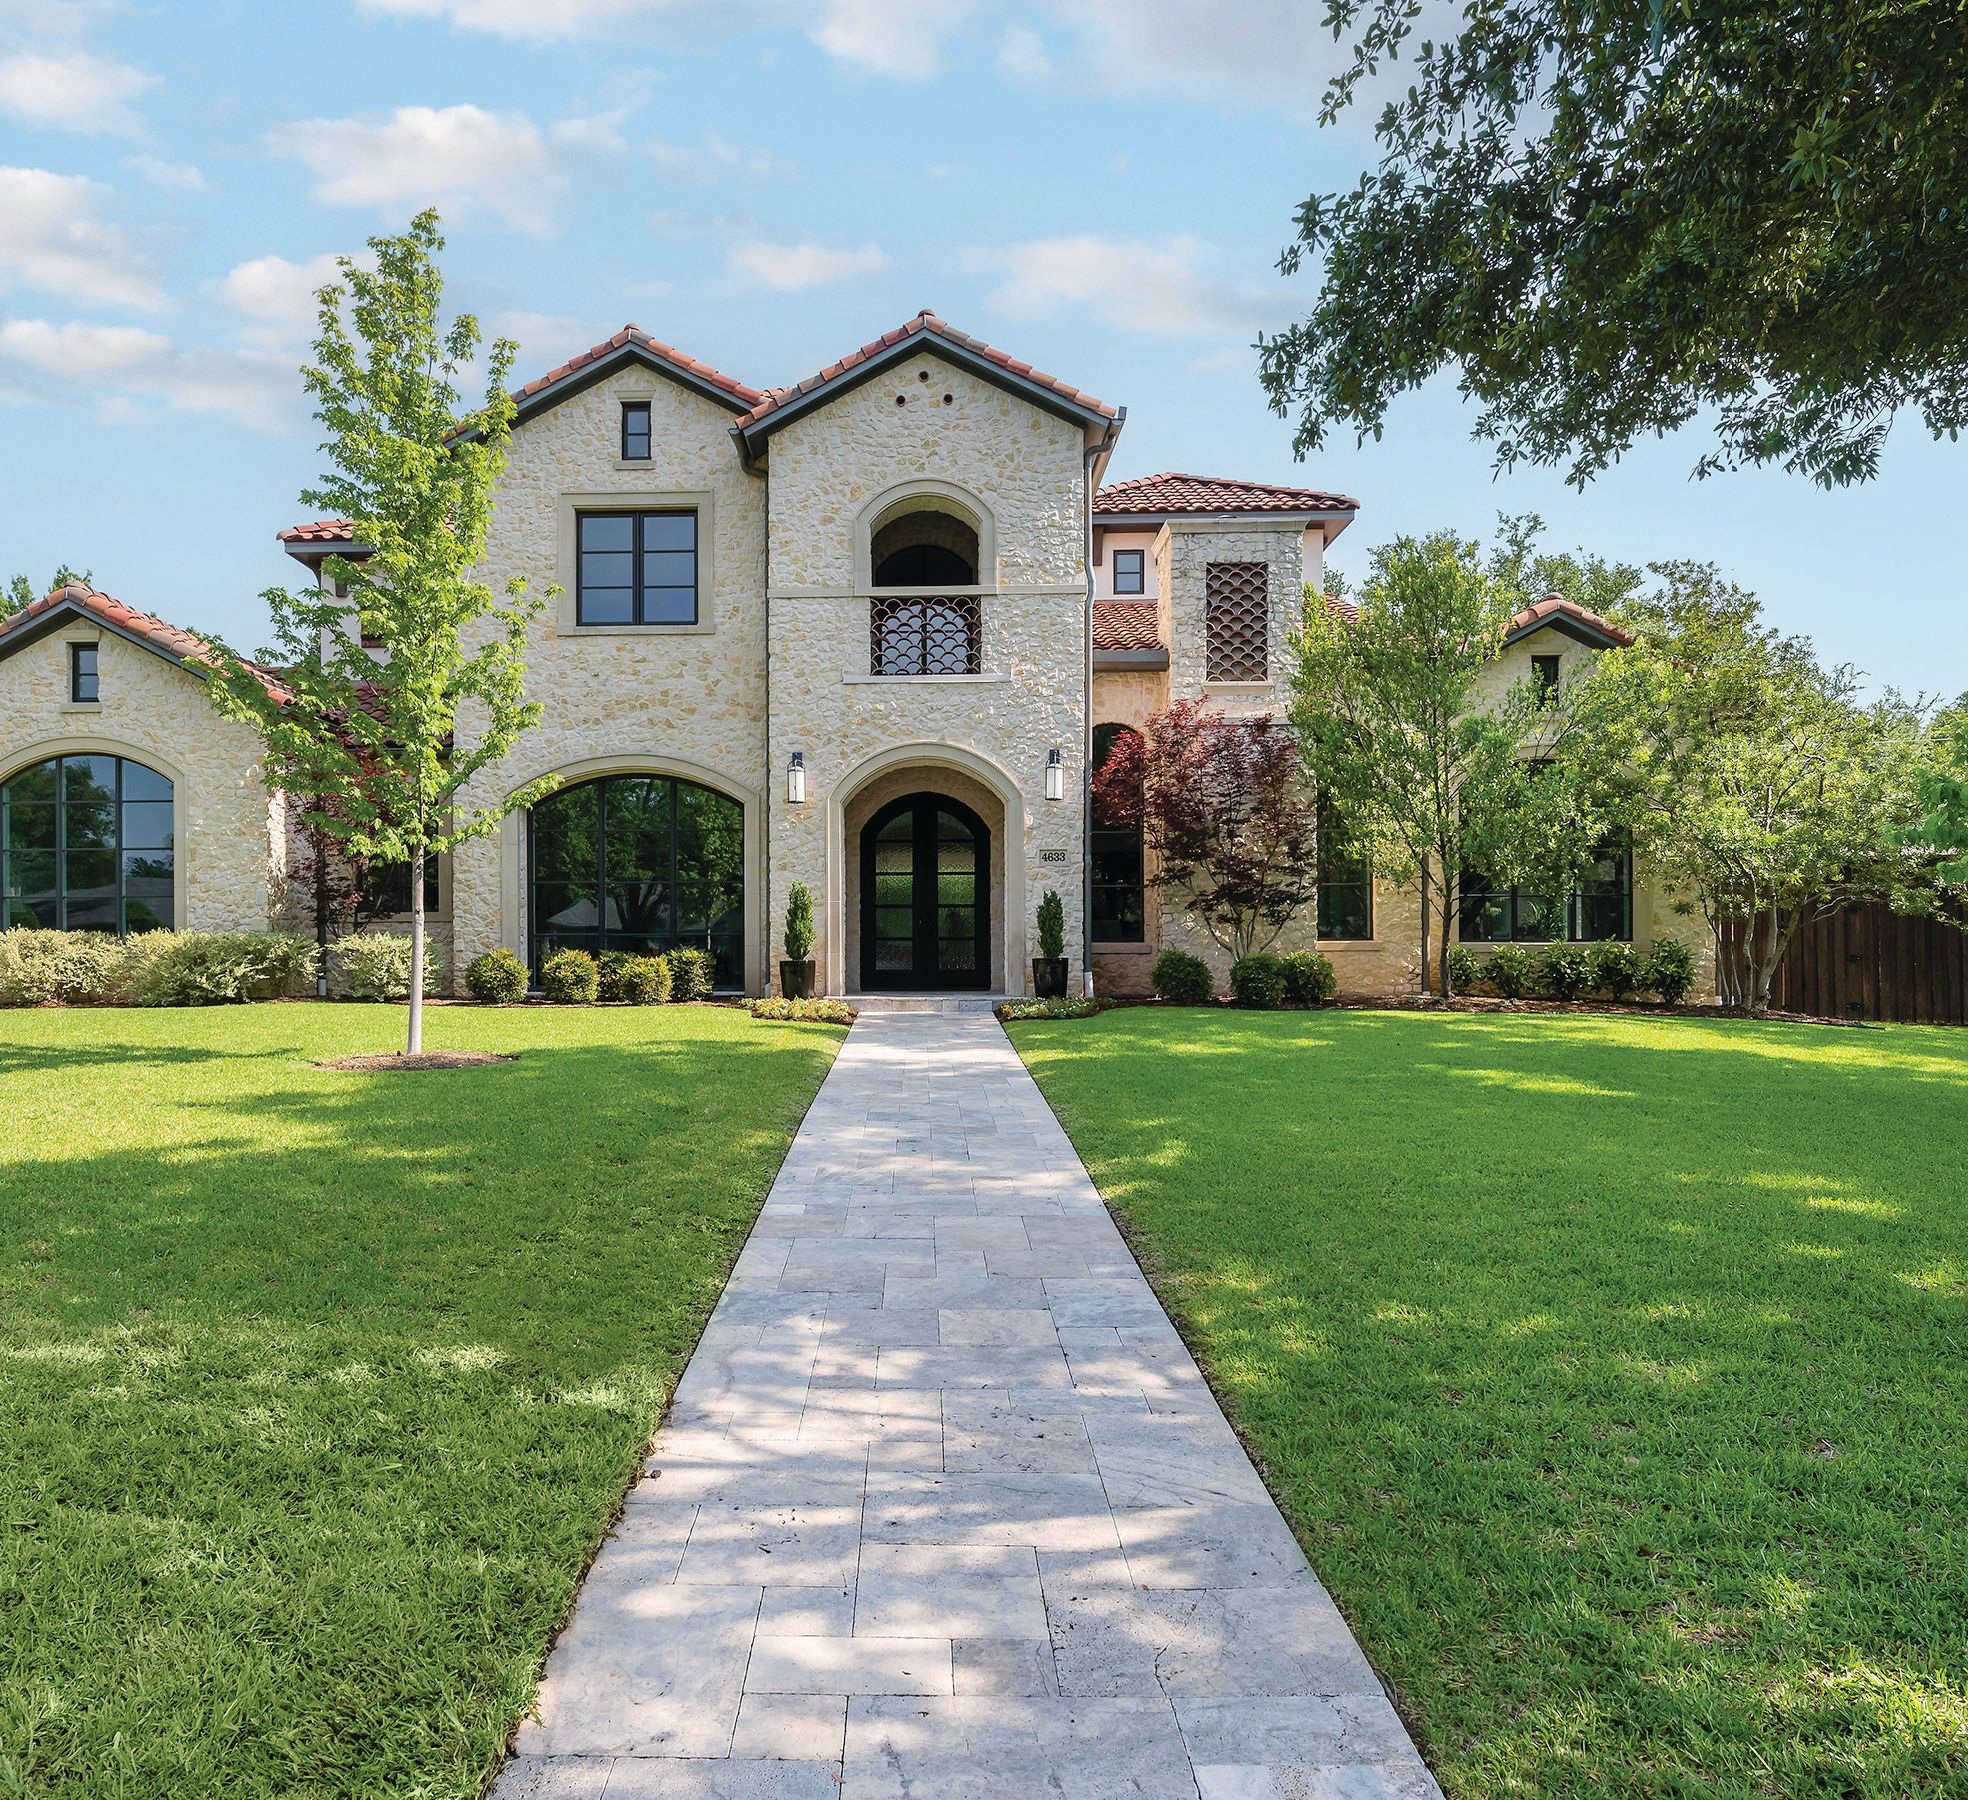 This stunning property sits in the covetable Preston Hollow neighborhood in Dallas—convenient to private schools, some of the city’s hottest restaurants and luxury shopping